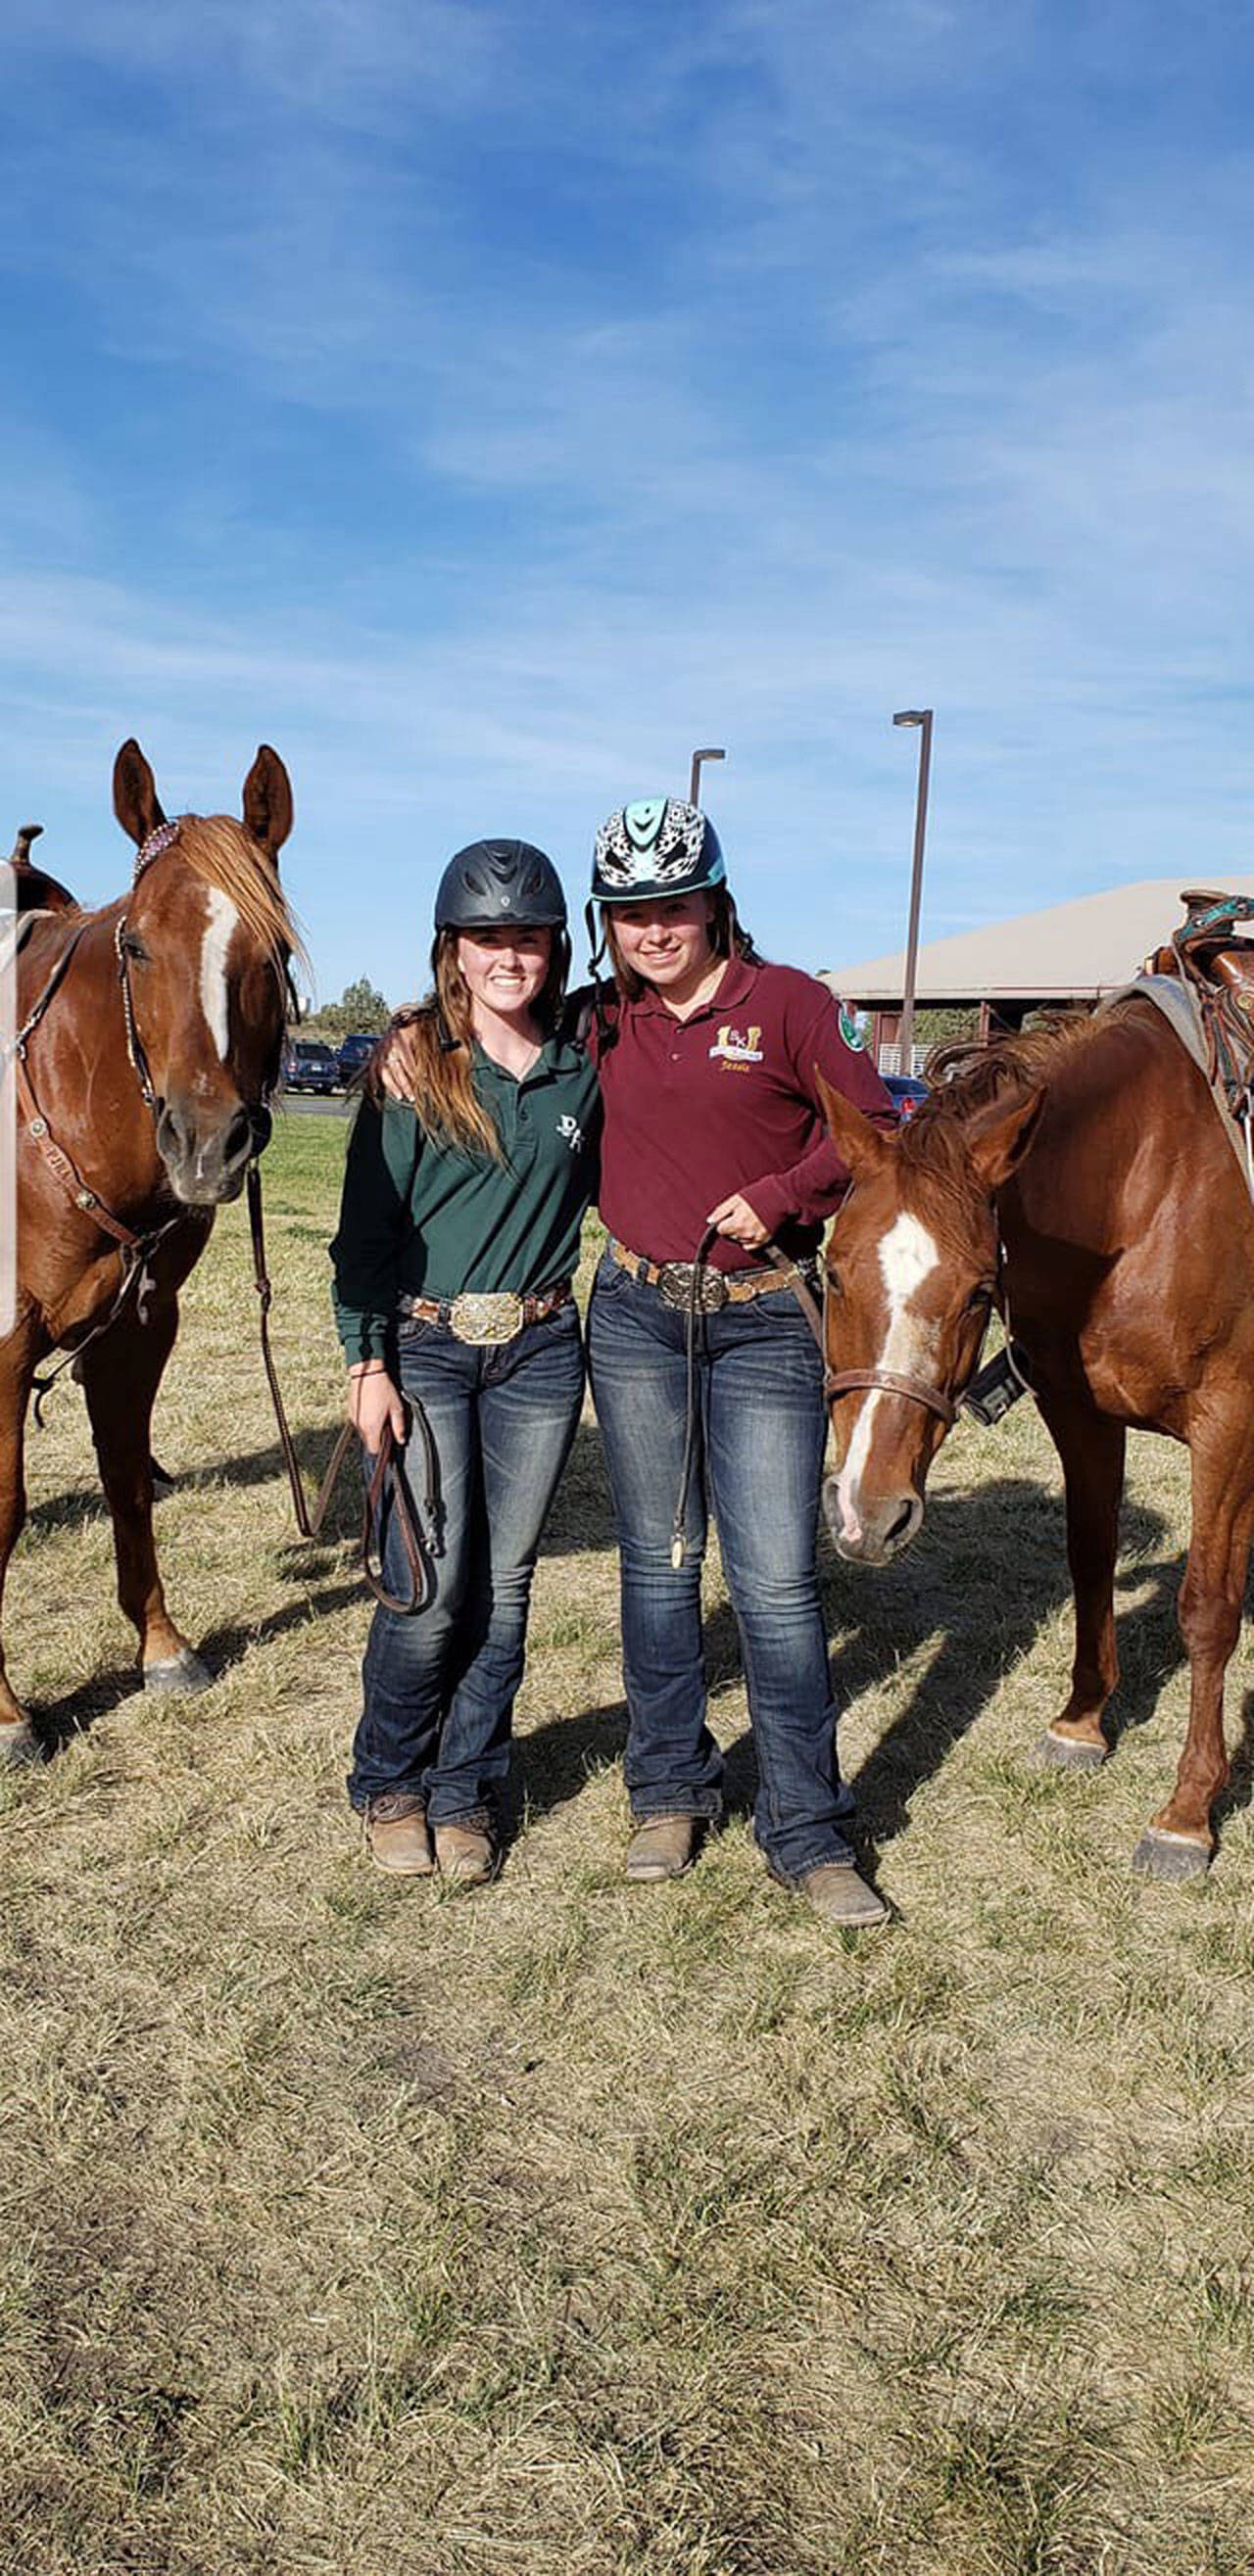 Port Angeles’ Cassi Ann Moore, left, is shown with friend and fellow competitor Jessie Ferrington, after winning the gold medal in pole bending at the Pacific Northwest Invitational Championship in Redmond, Ore., last weekend. (Bethel Moore)